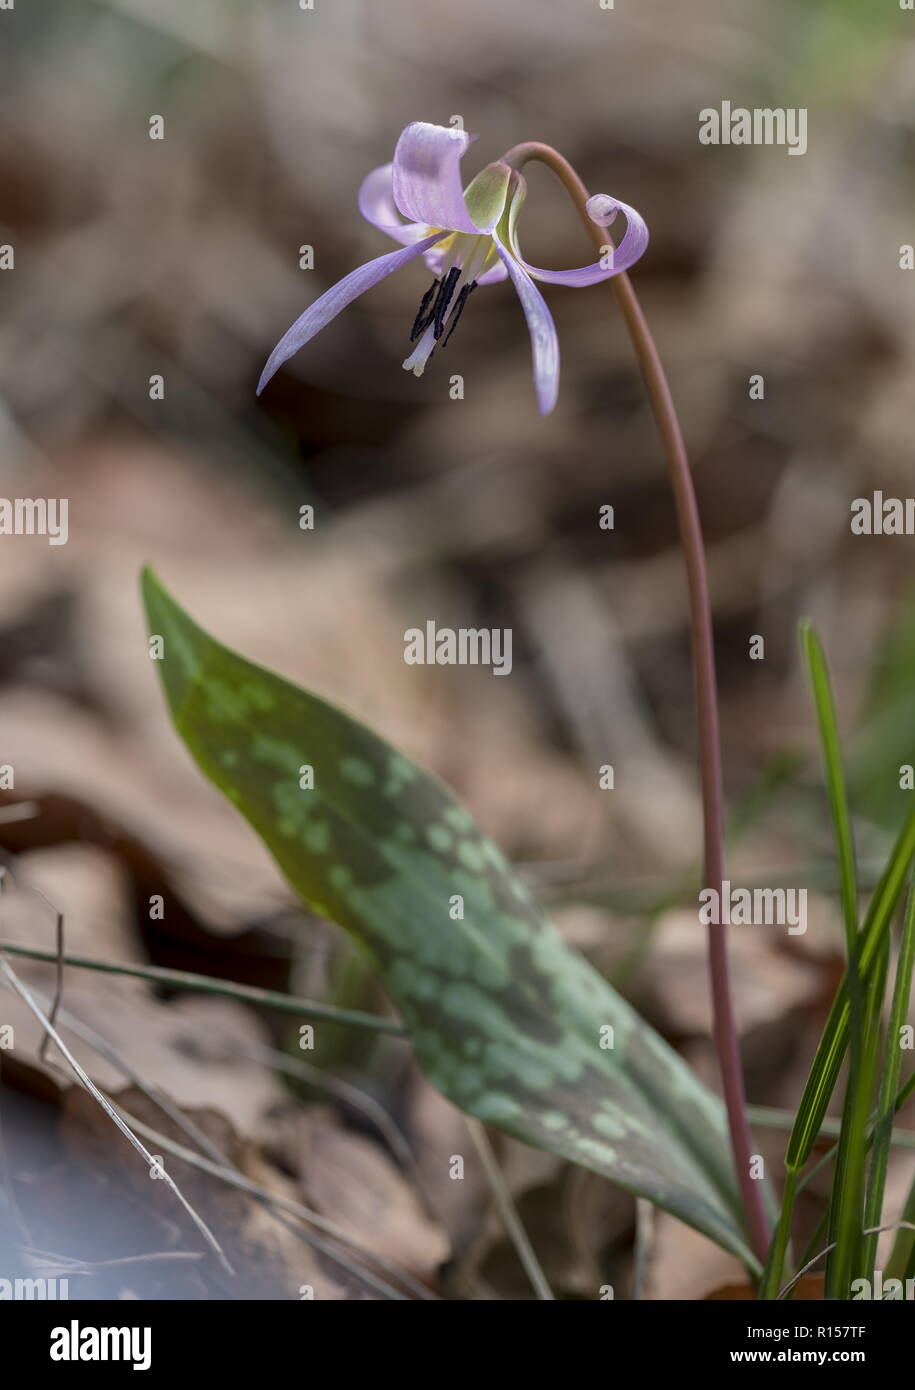 Dog's-tooth-violet, Erythronium dens-canis in flower in montane beechwood, Croatia. Stock Photo